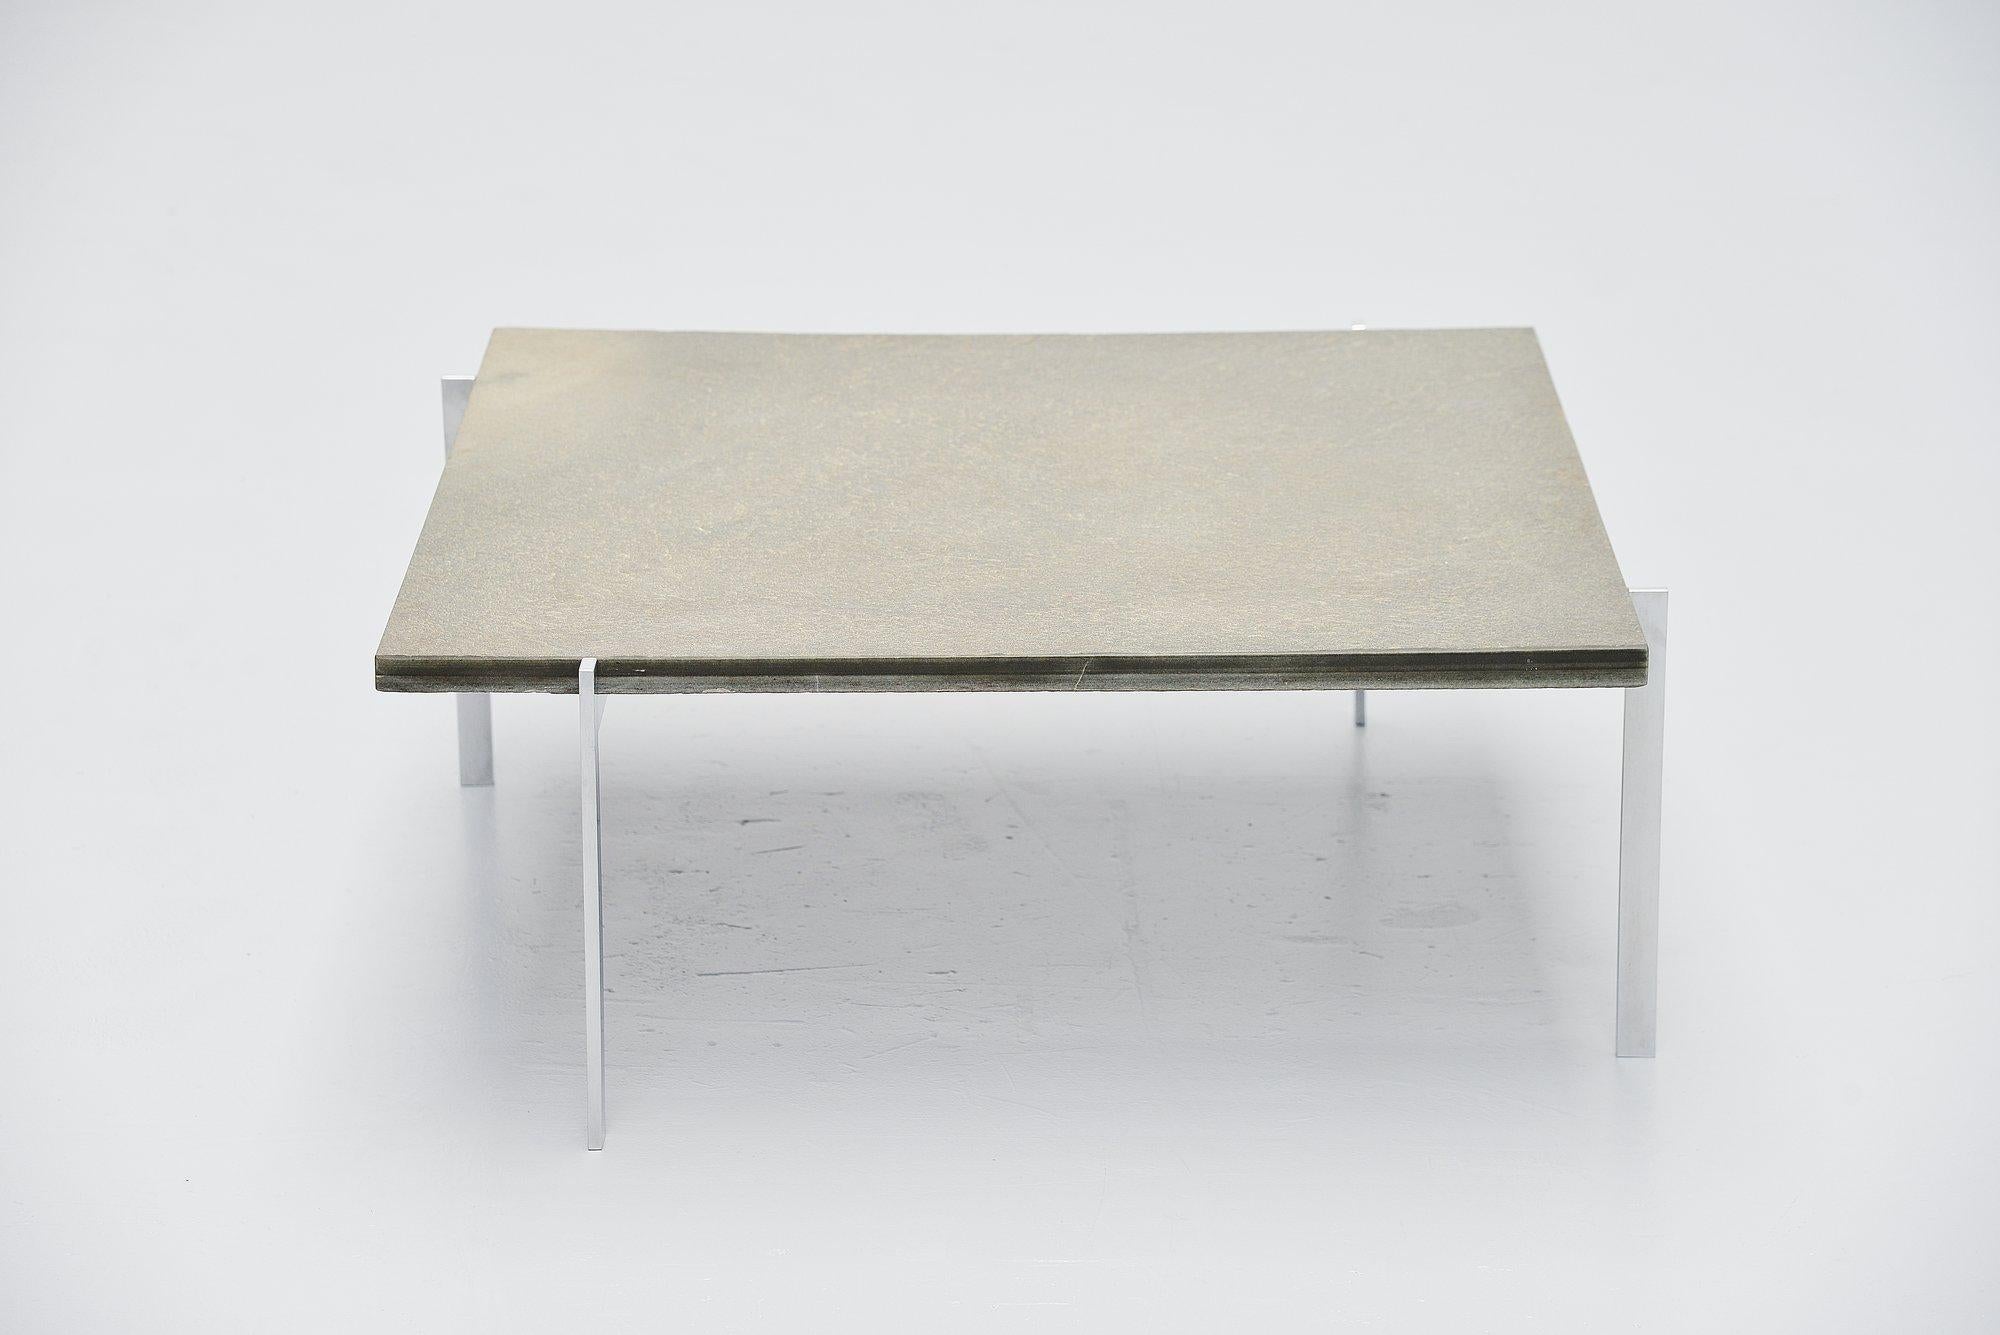 Here for one of the most known designs by Poul Kjaerholm, this coffee table model PK61 designed for E Kold Christensen, Denmark, 1956. Poul Kjaerholm wanted to sell the production rights to Fritz Hansen at first but they didn’t want it. After a